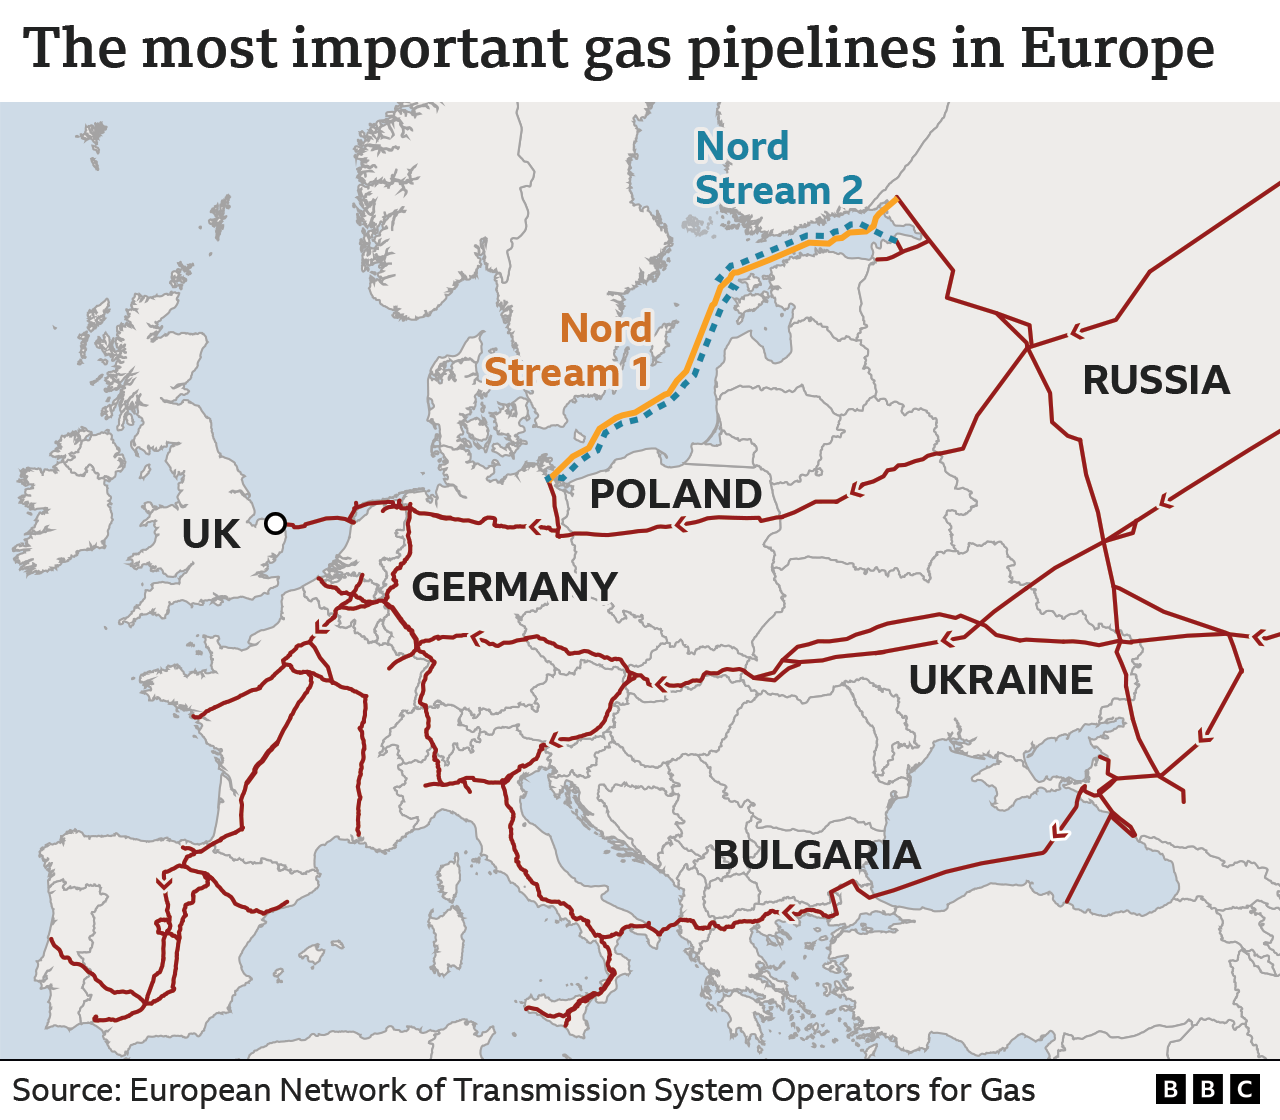 No going back to reliance on Russian gas from here - BBC News